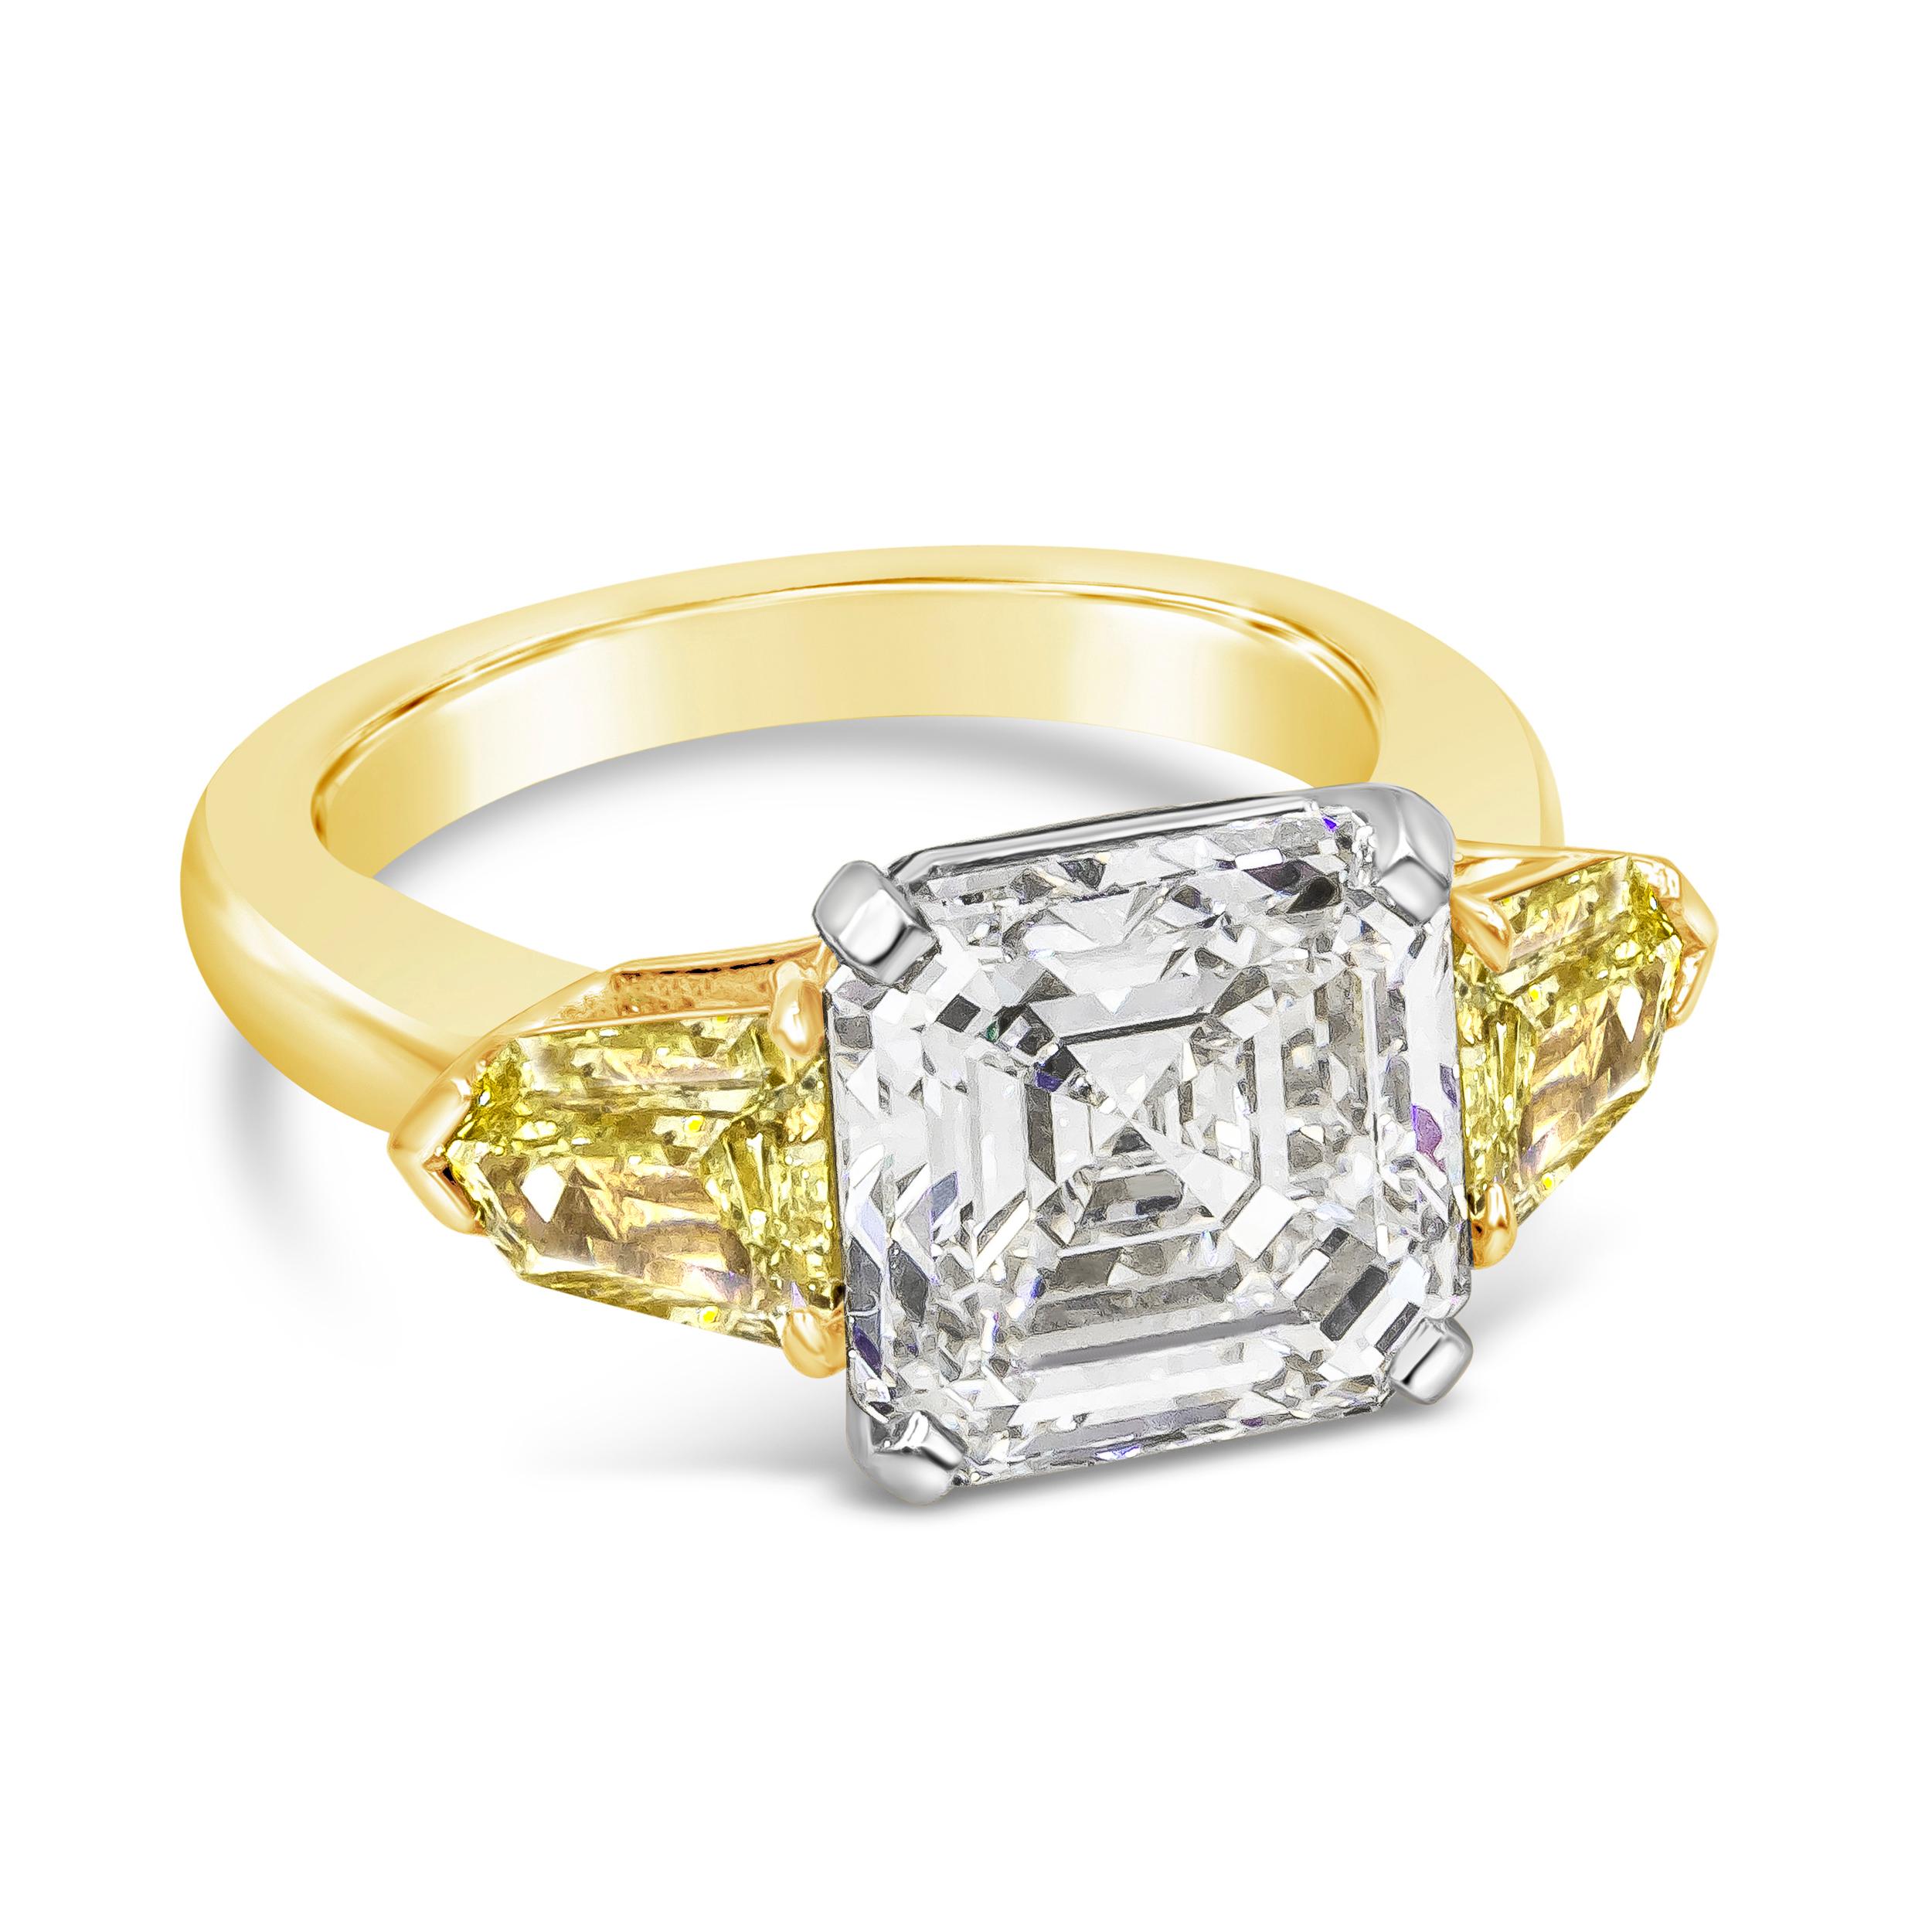 Well crafted high end engagement ring showcasing a 5.05 carats GIA certified asscher cut diamonds, VS1 in clarity. Flanked by two color-rich yellow diamonds on either side weighing 0.81 carats total. Set and finely made in 18k yellow gold. Center